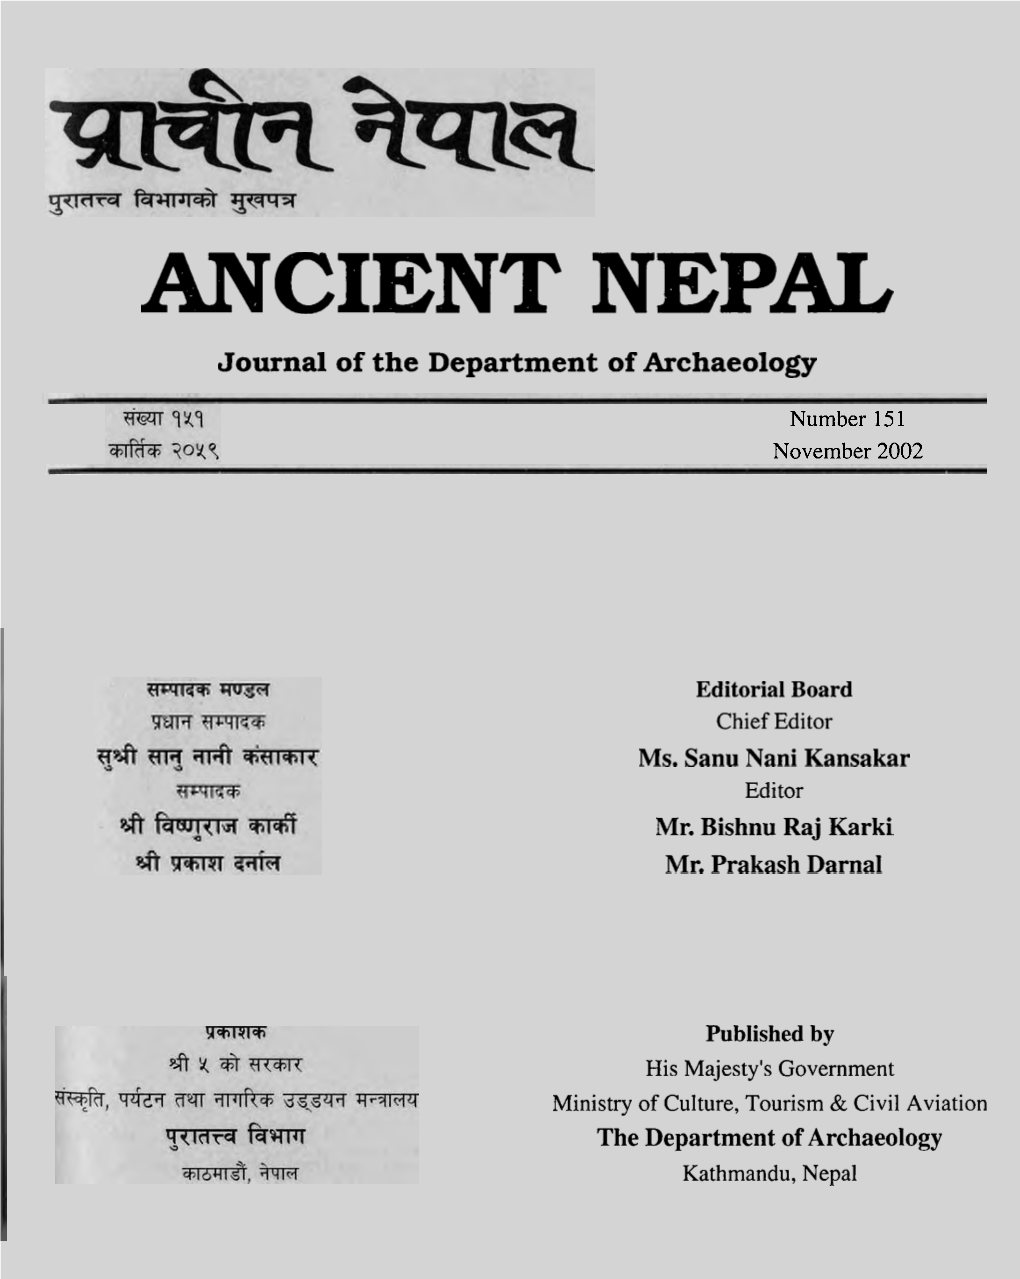 ANCIENT NEPAL Journal of the Department of Archaeology